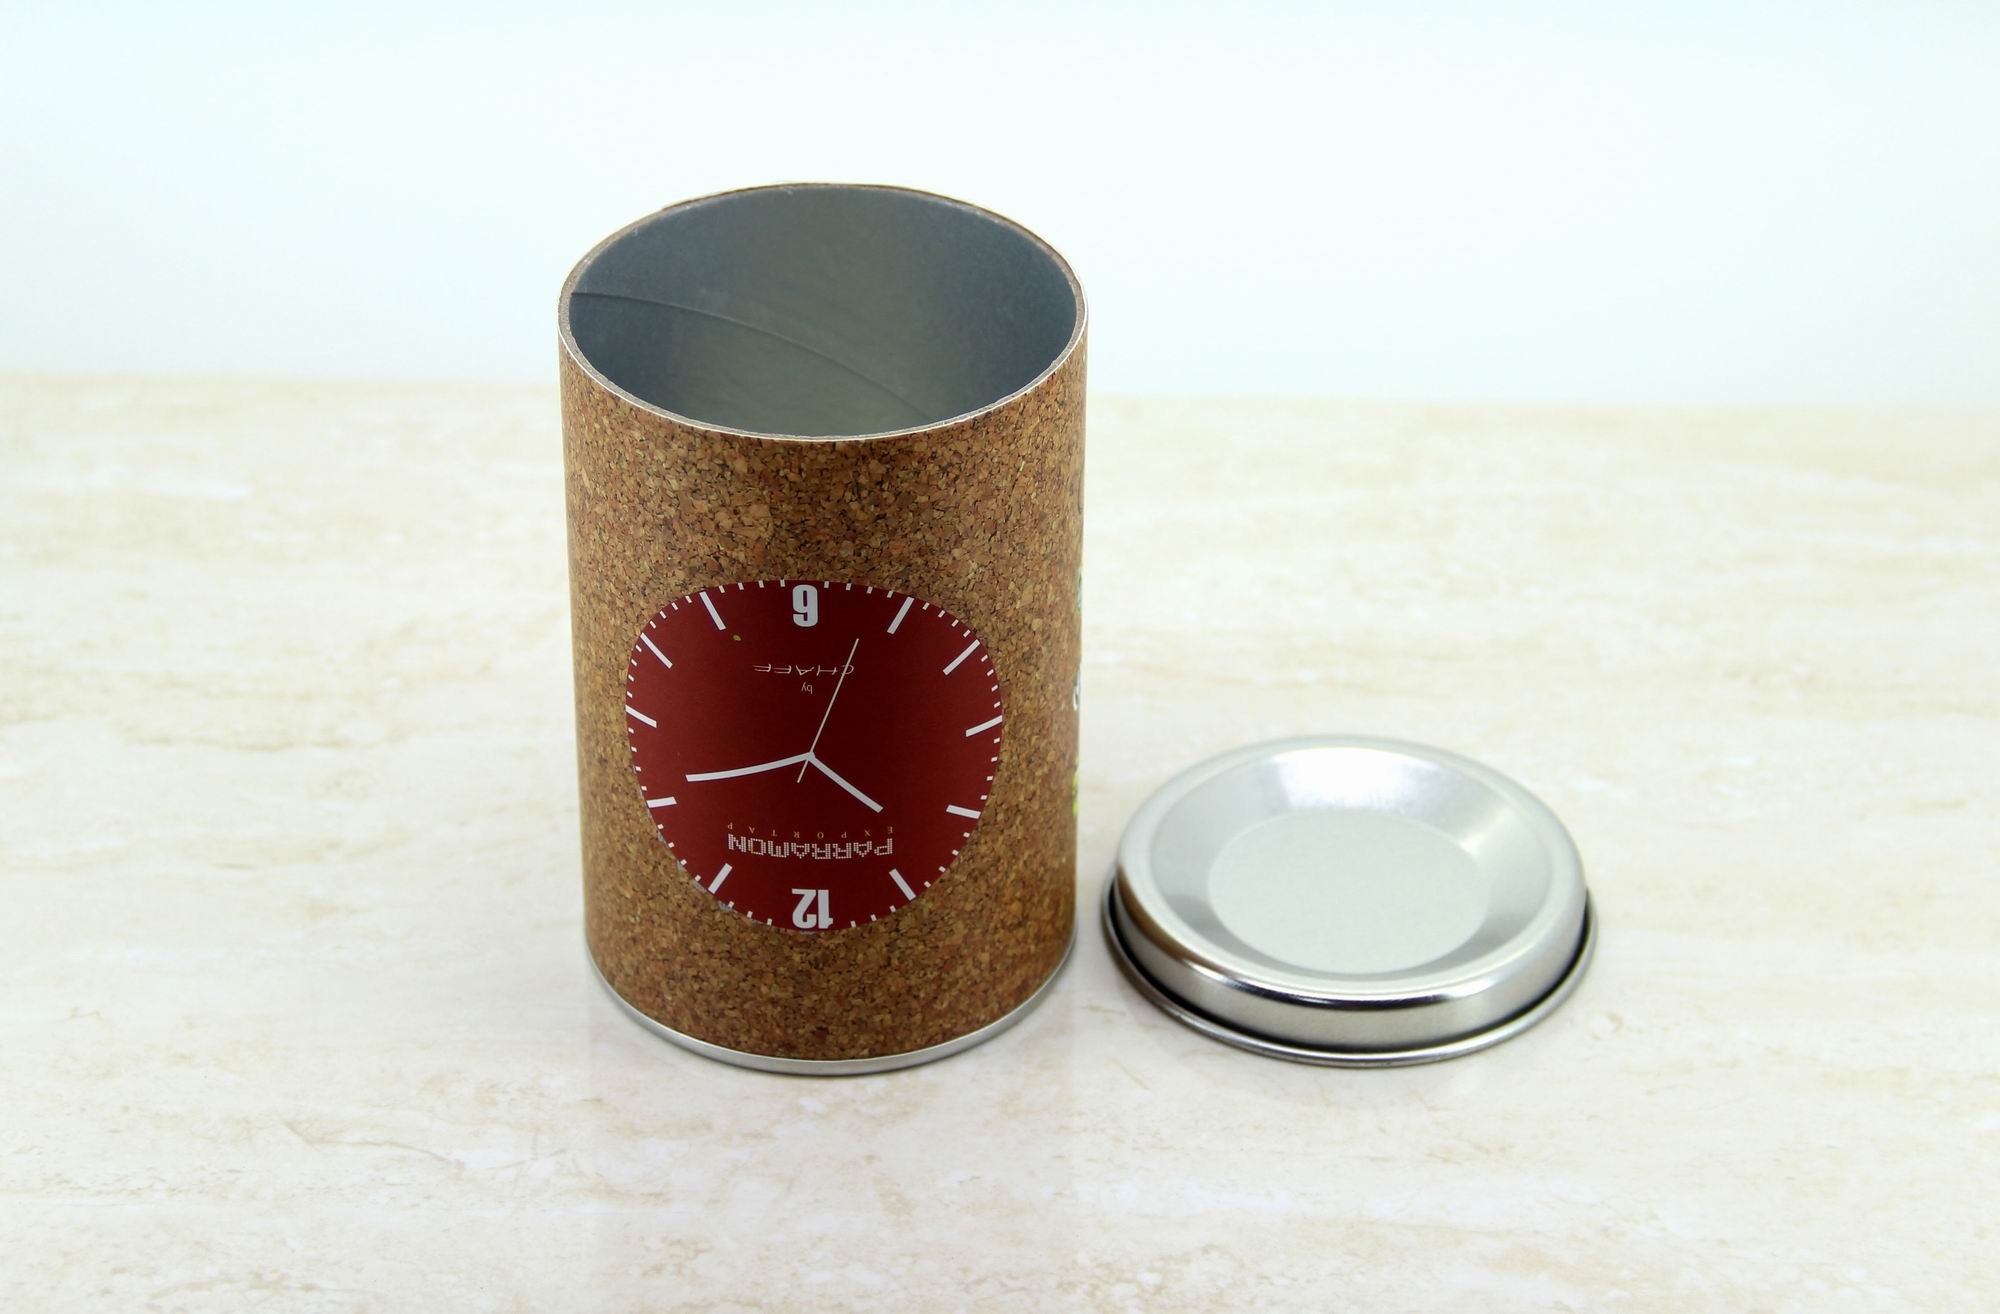 Flexible Kraft Paper Cans Packaging With Metal Lids For T-Shirt And Gift